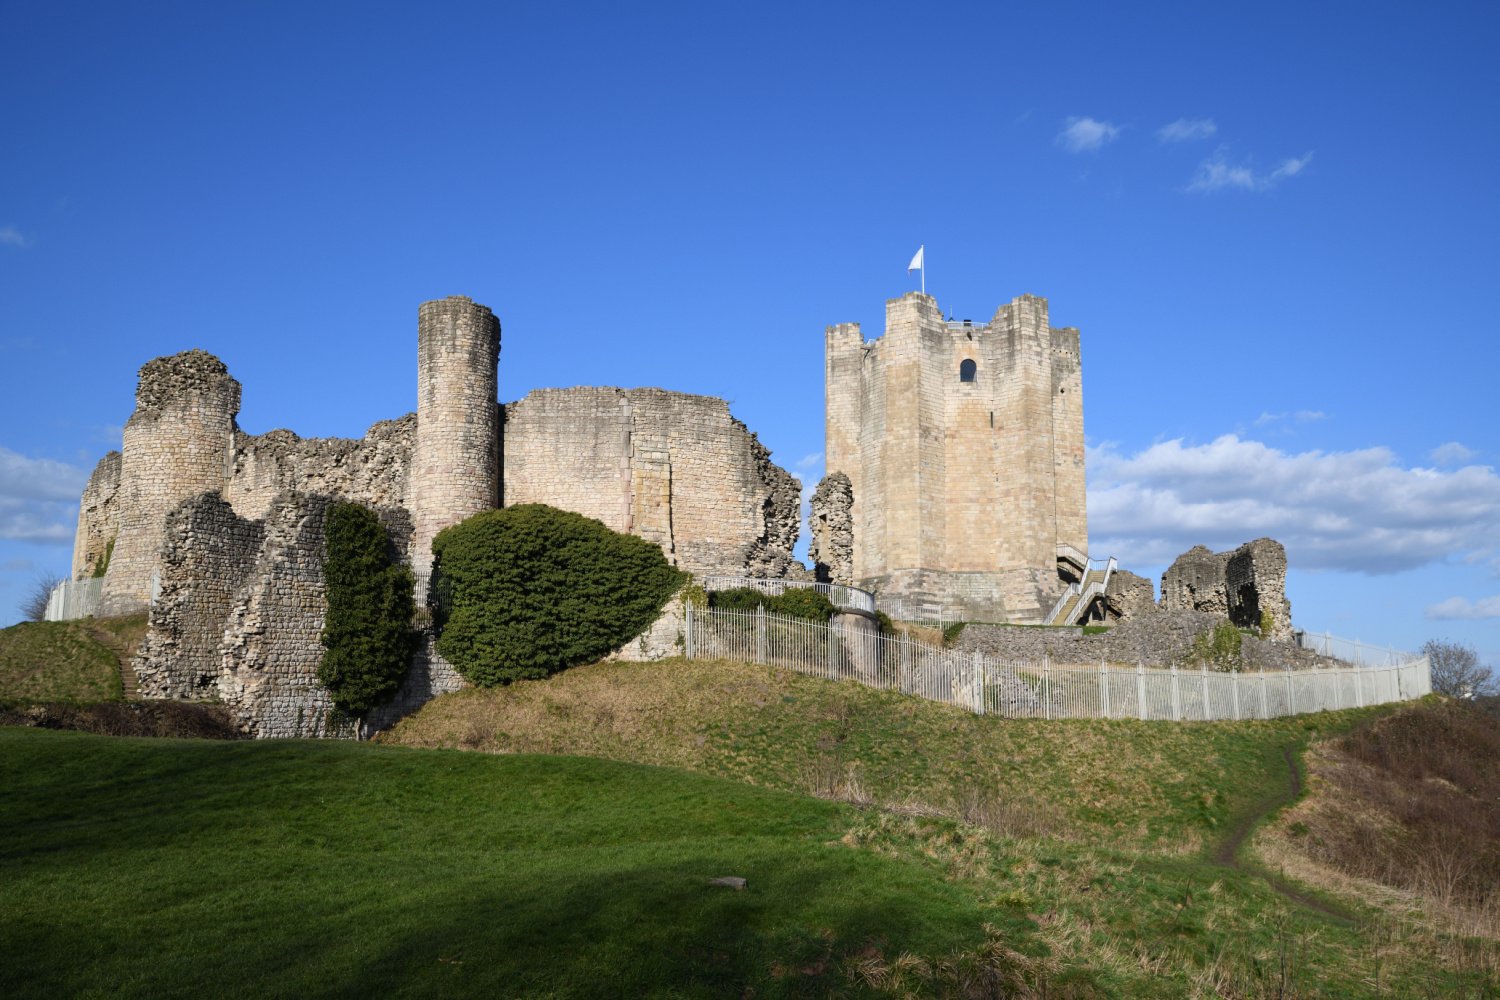 Image name conisbrough castle near doncaster south yorkshire the 26 image from the post A look at the history of Conisbrough Castle, with Dr Emma Wells in Yorkshire.com.